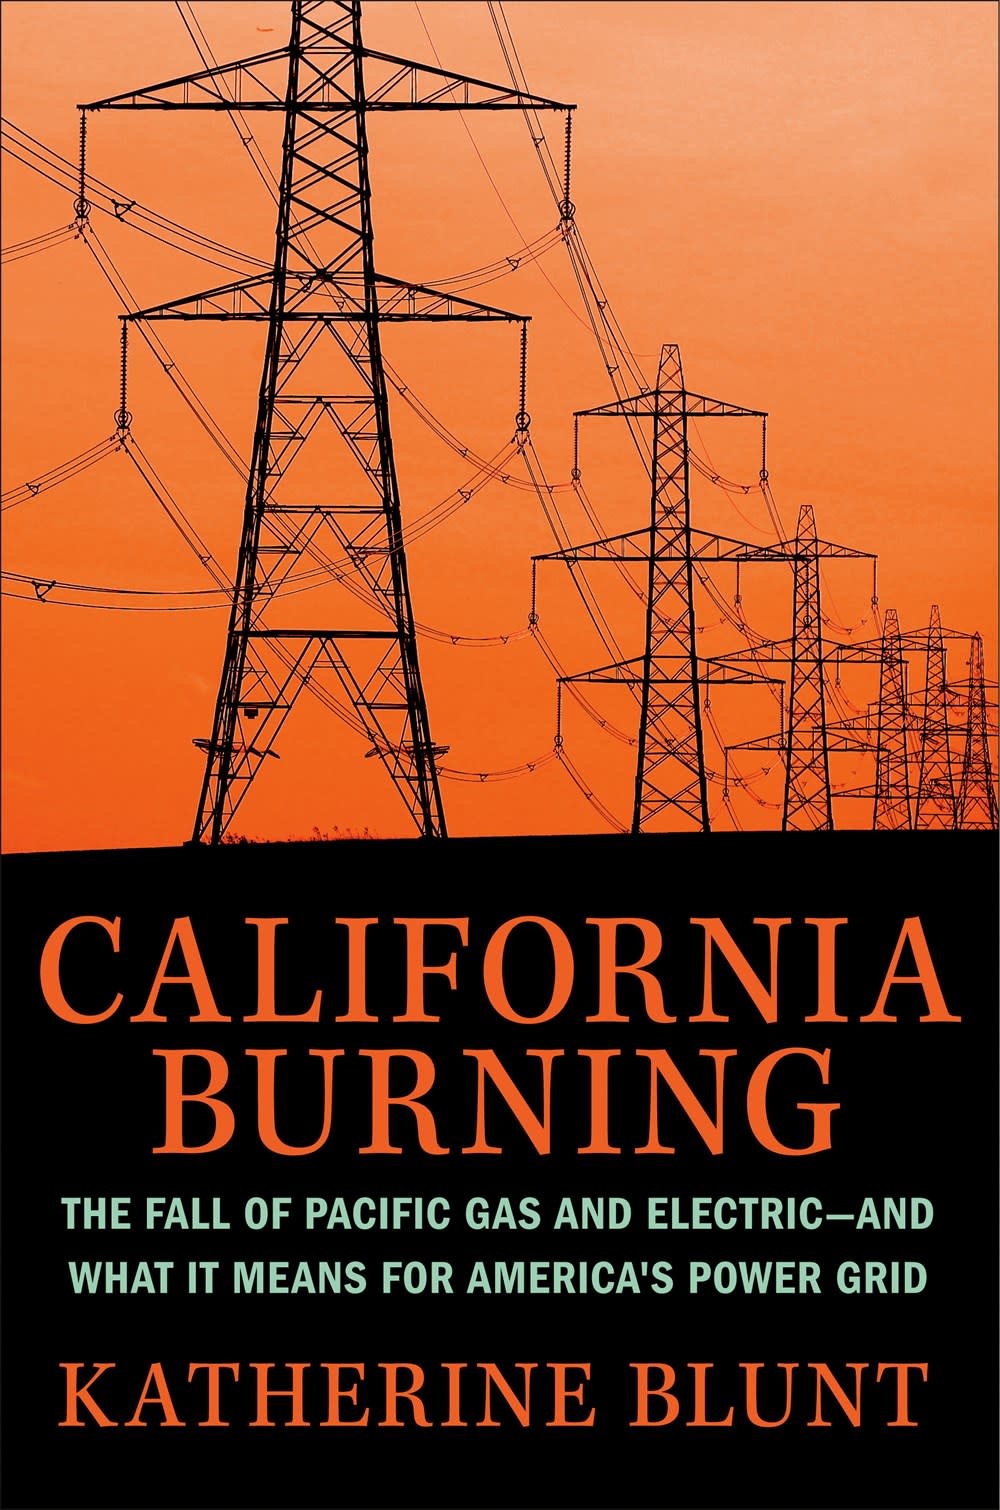 Portfolio California Burning: The Fall of Pacific Gas and Electric--and What It Means for America's Power Grid